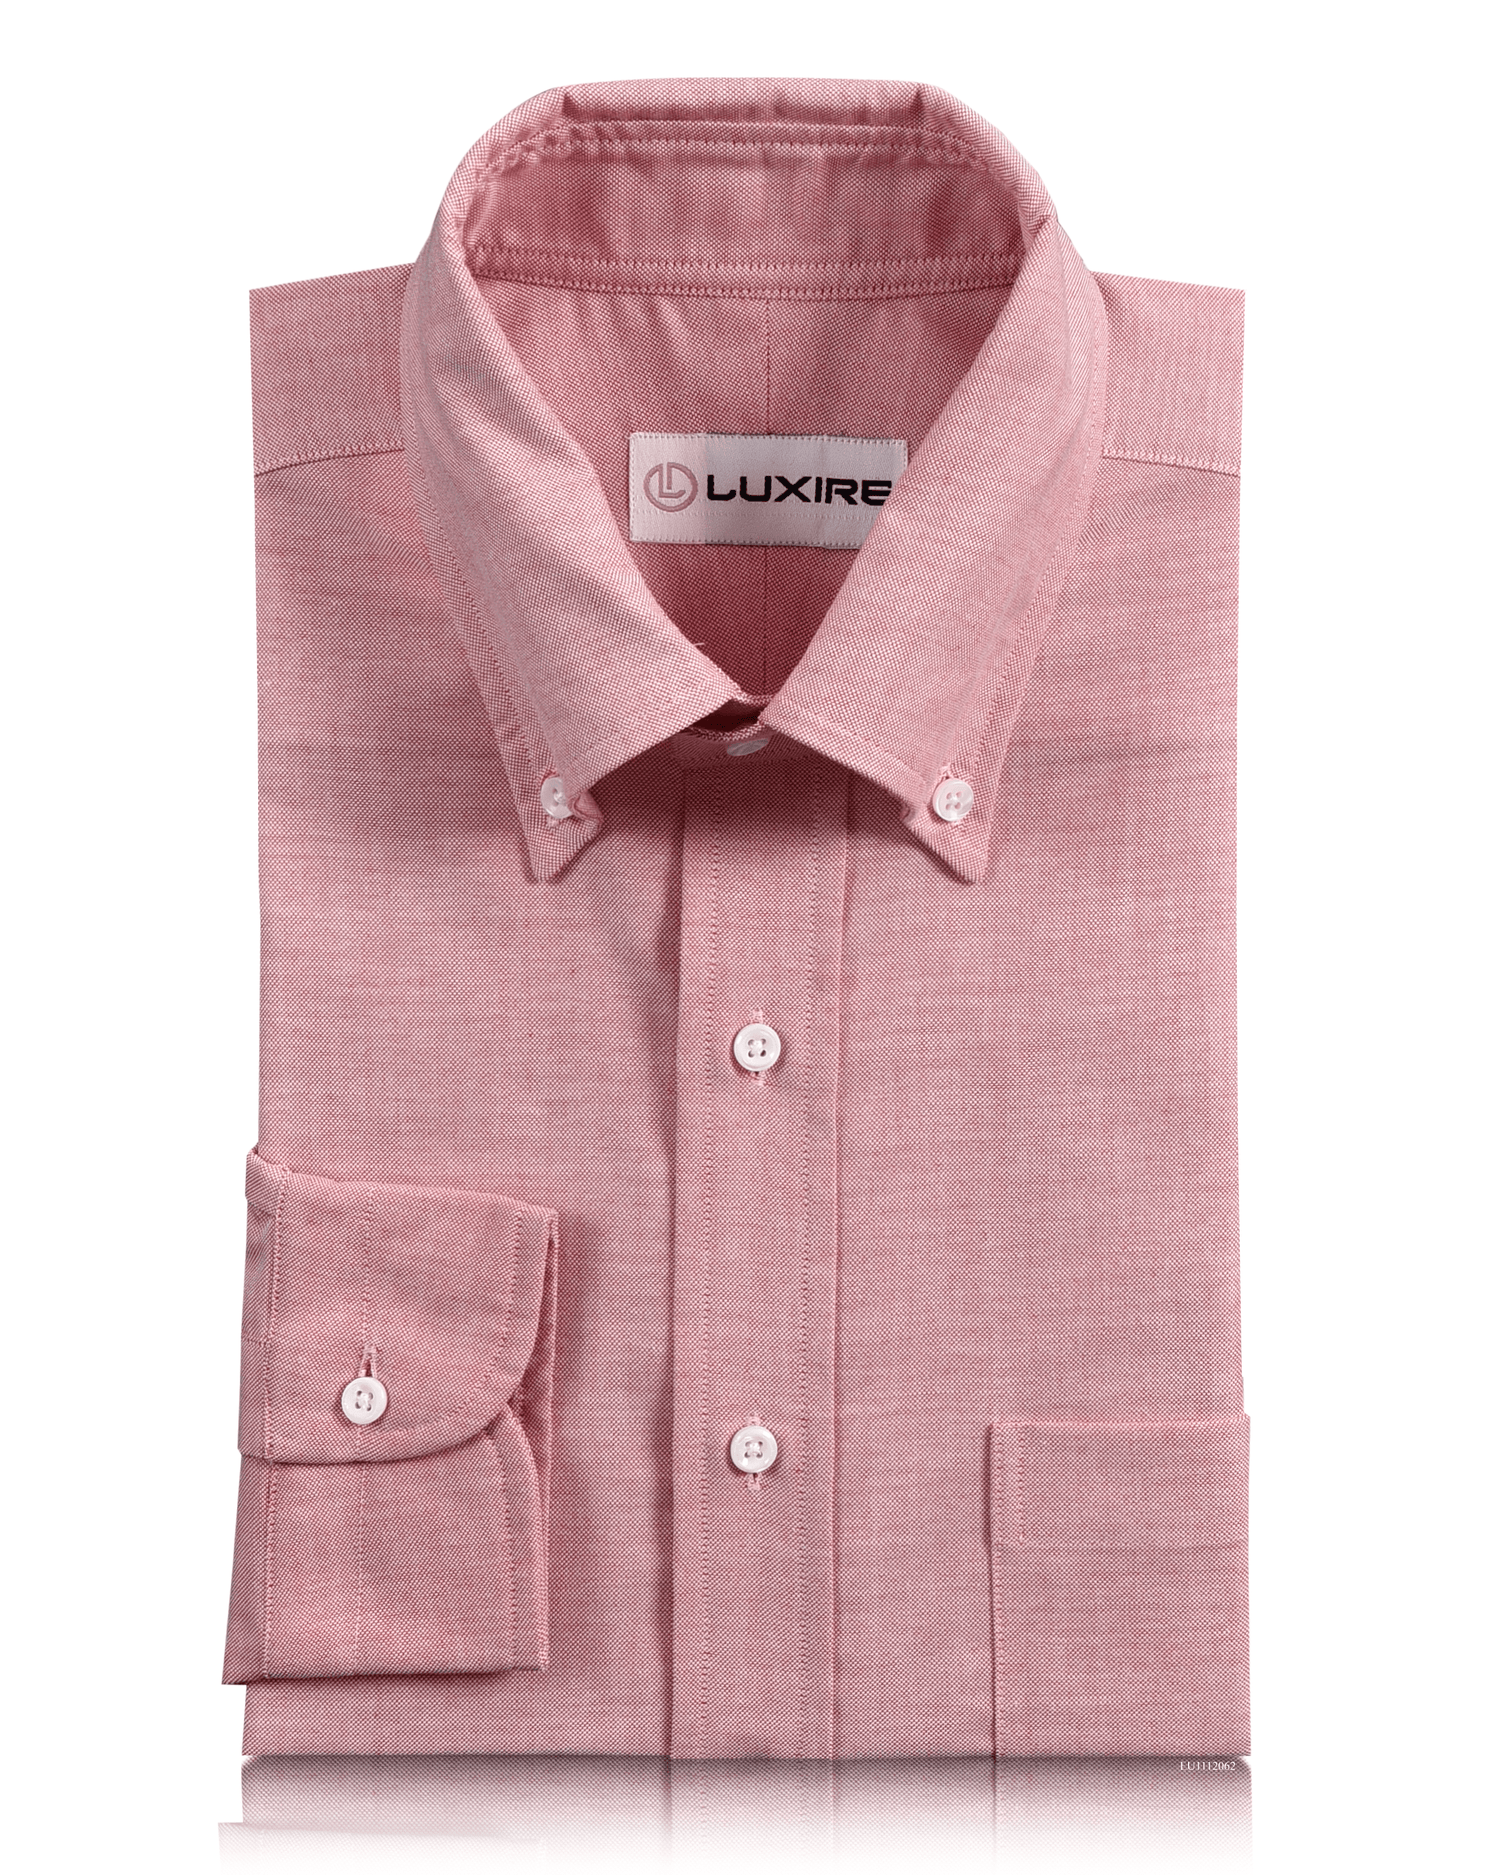 Front of the custom oxford shirt for men by Luxire in classic red